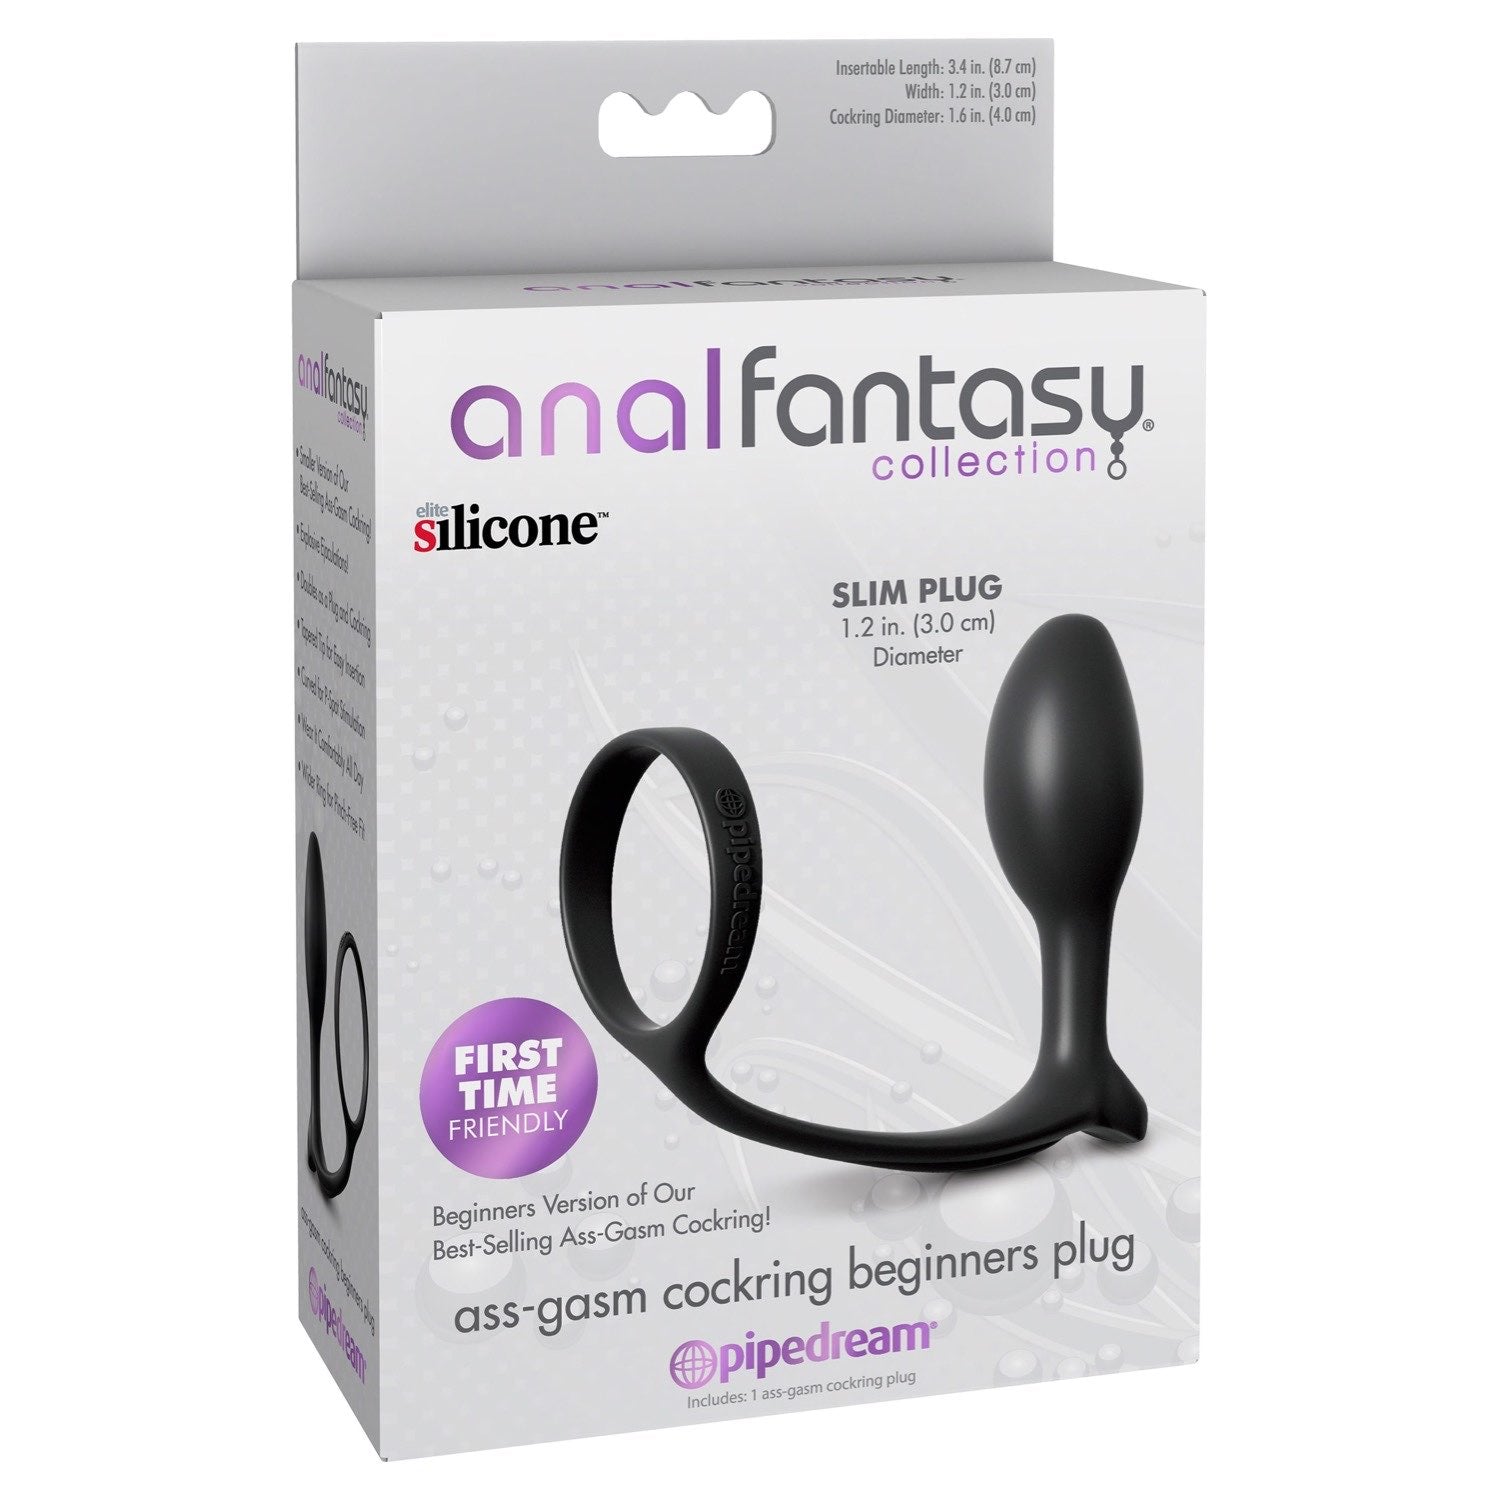 Anal Fantasy Collection Ass-Gasm Cock Ring Beginners Plug - Black Cock Ring with Anal Plug by Pipedream